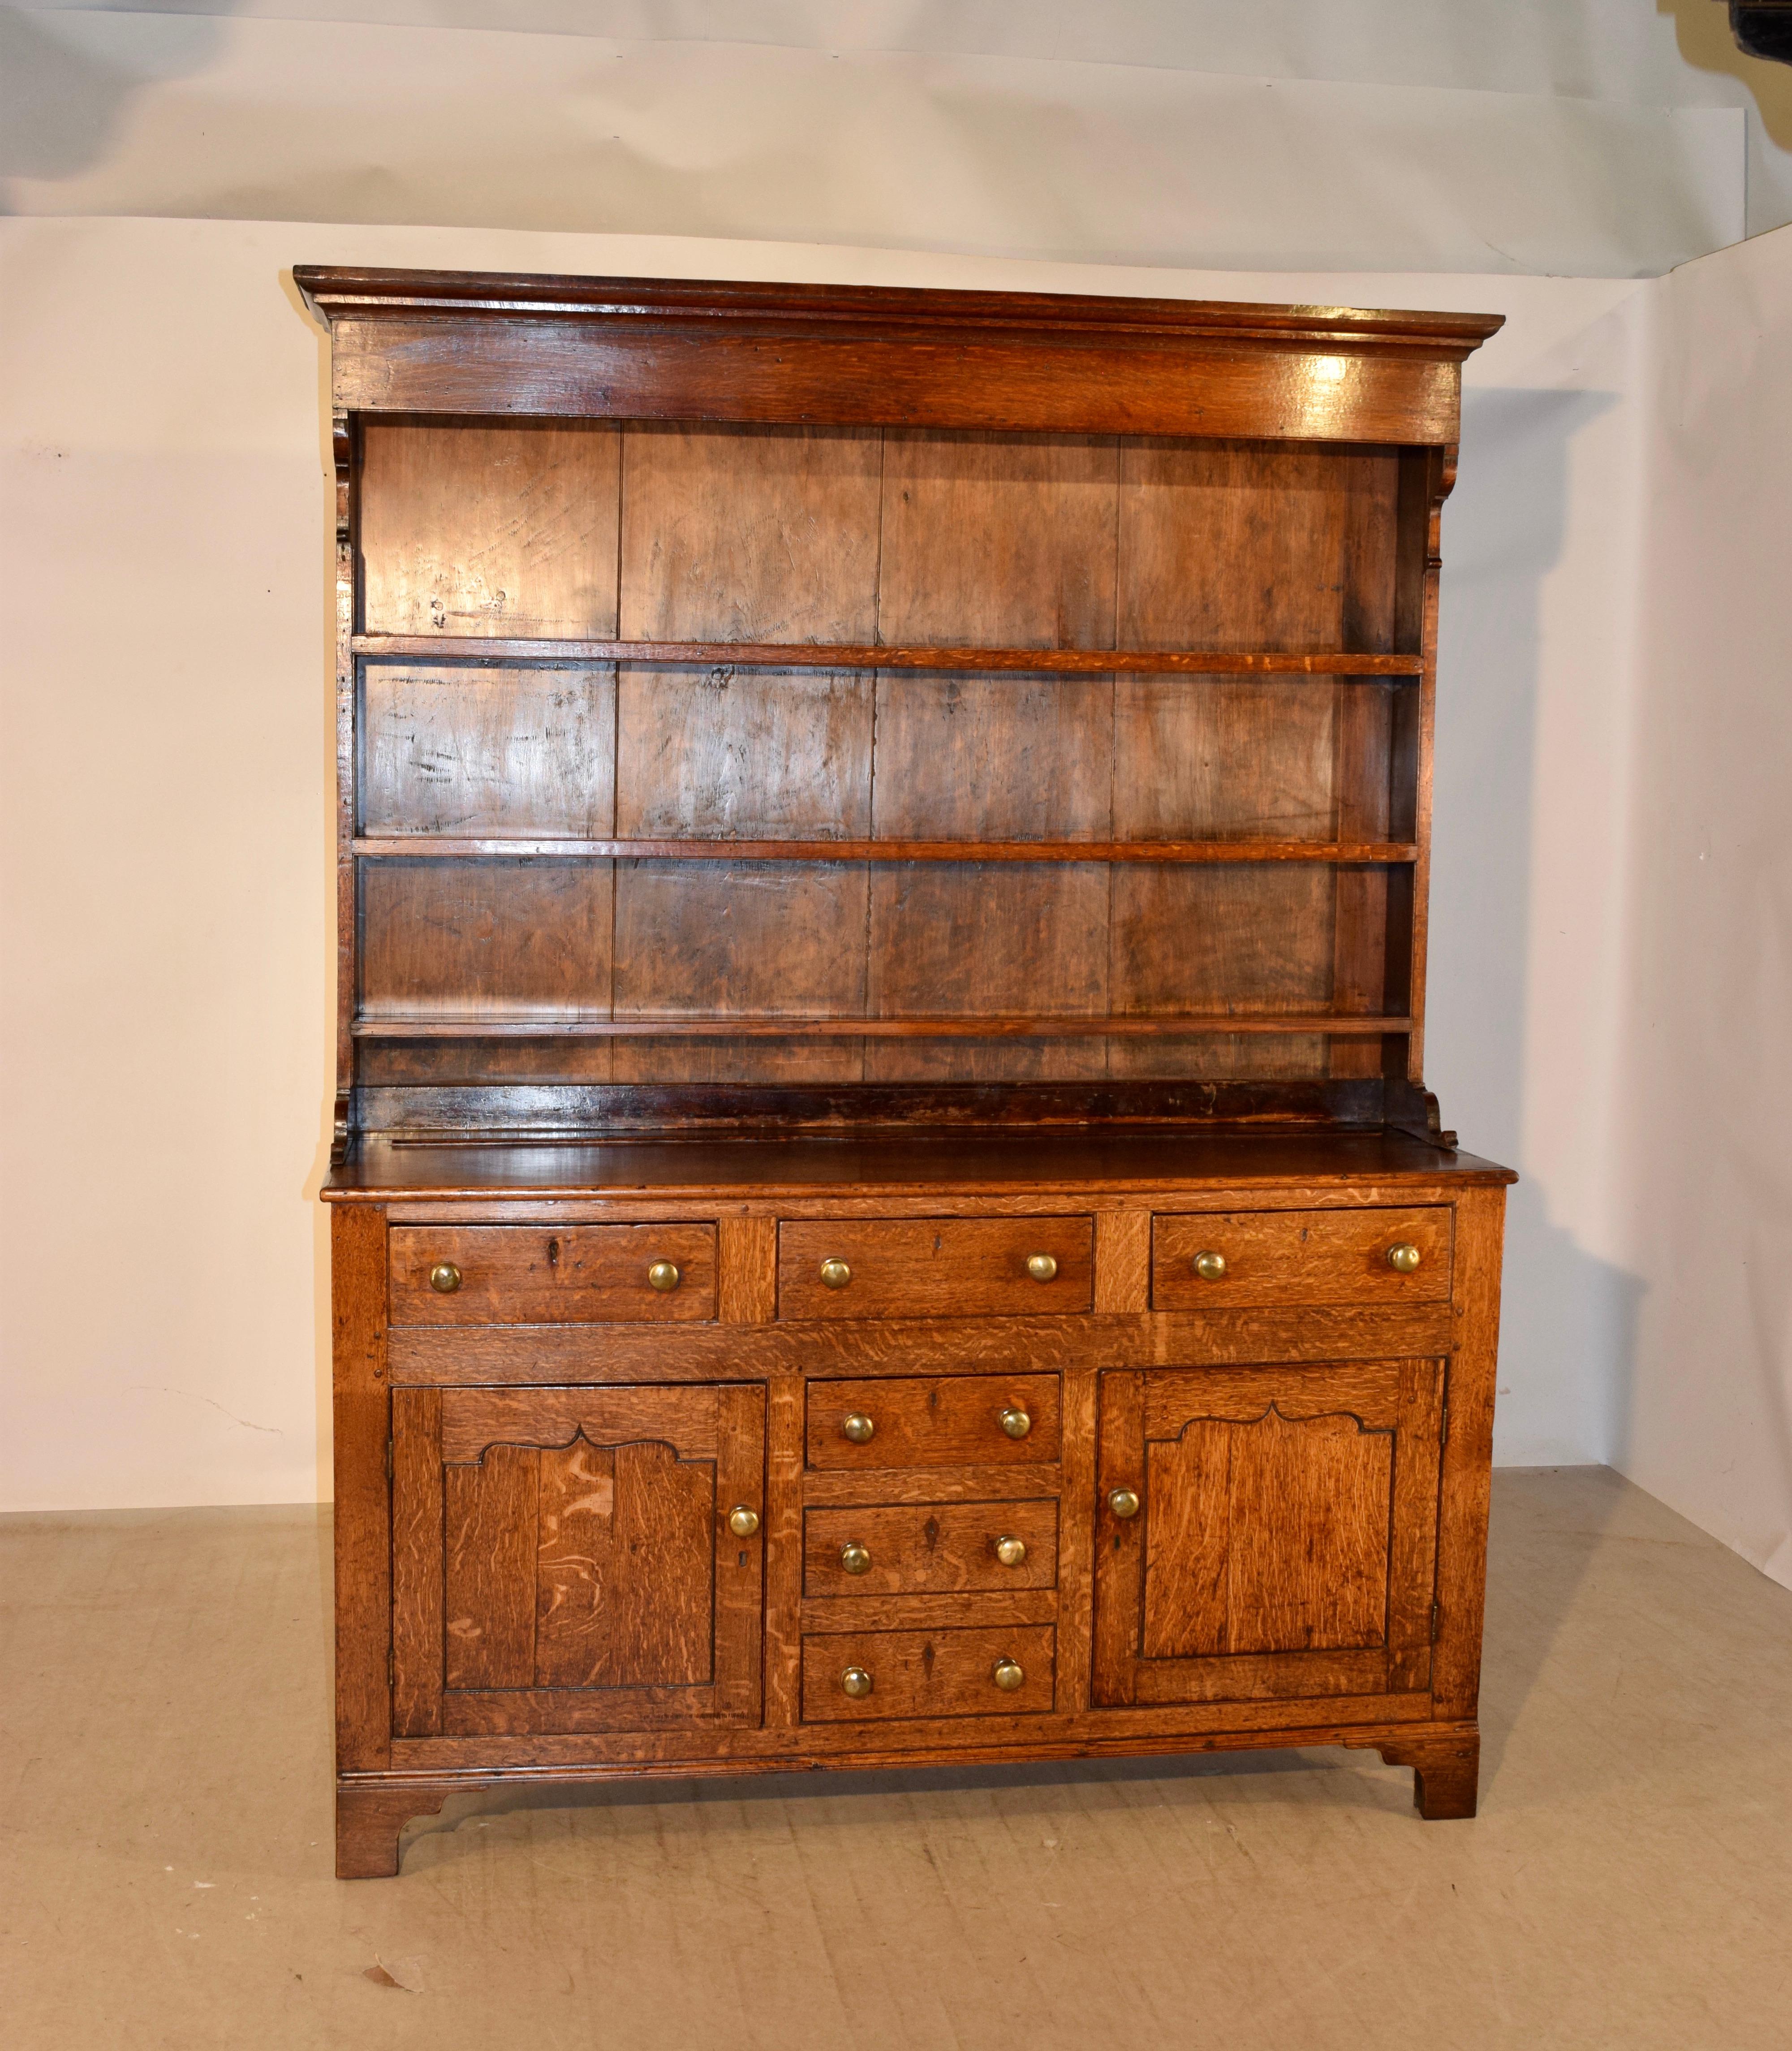 18th century welsh dresser made from oak. It has a wonderful crown over three shelves atop a lovely base with paneled sides and three drawers in the front over two raised paneled doors, which flank three  central drawers. The bottom two drawers are